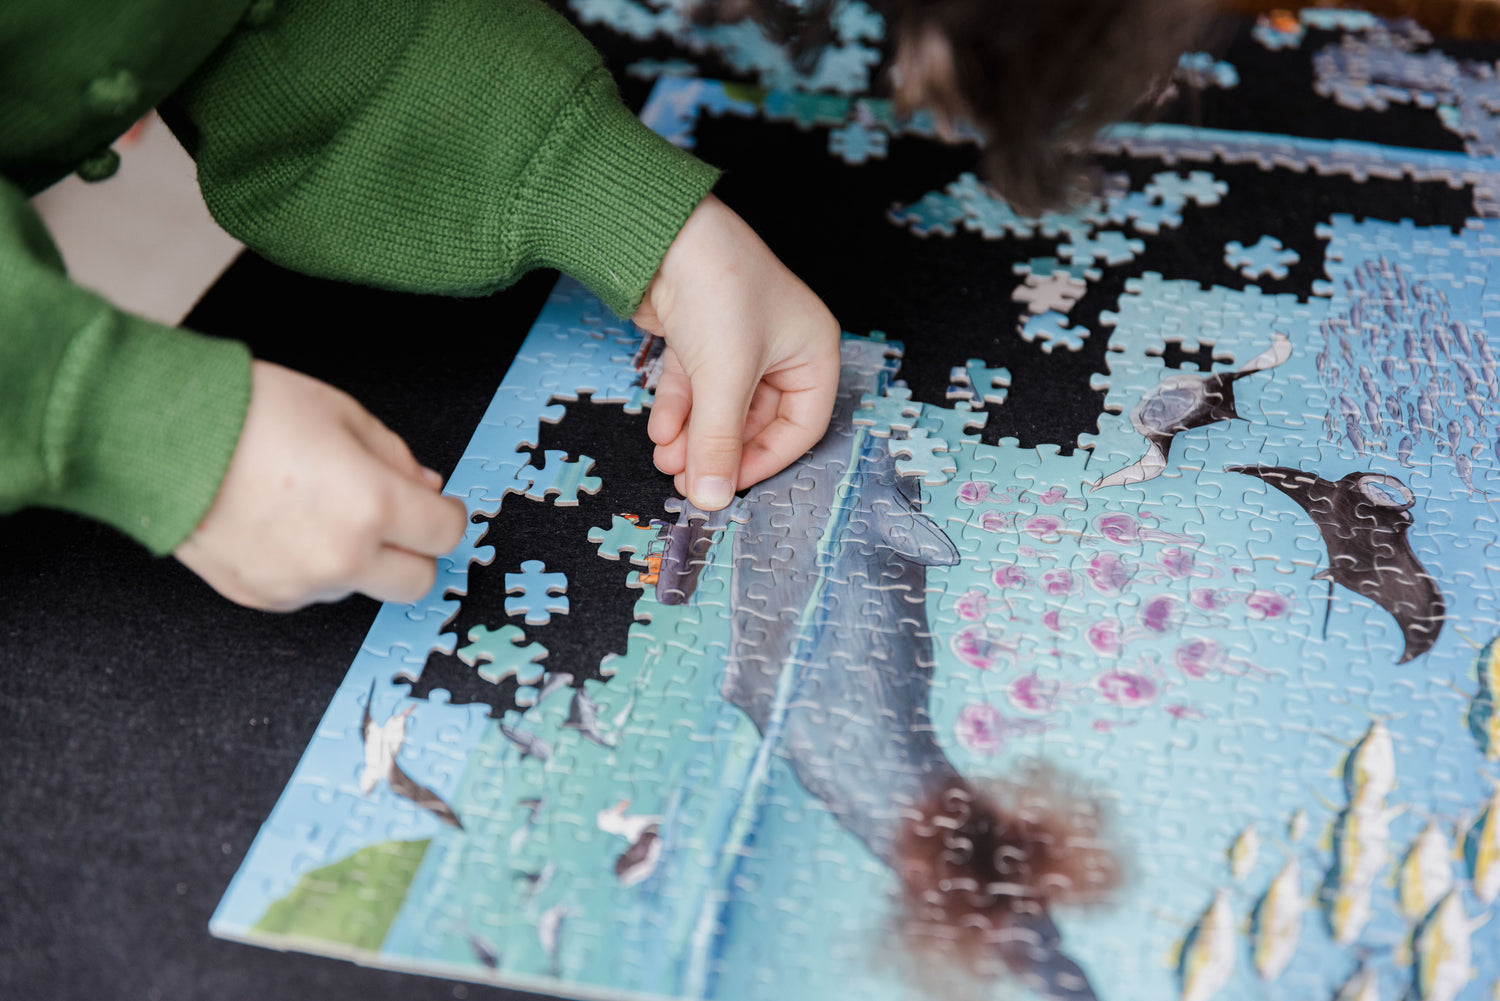 The hands of a 6 year old girl putting puzzle pieces into a jigsaw puzzle. The puzzle is "Whale Poo and CO2" and shows a picture of a whale pooing.